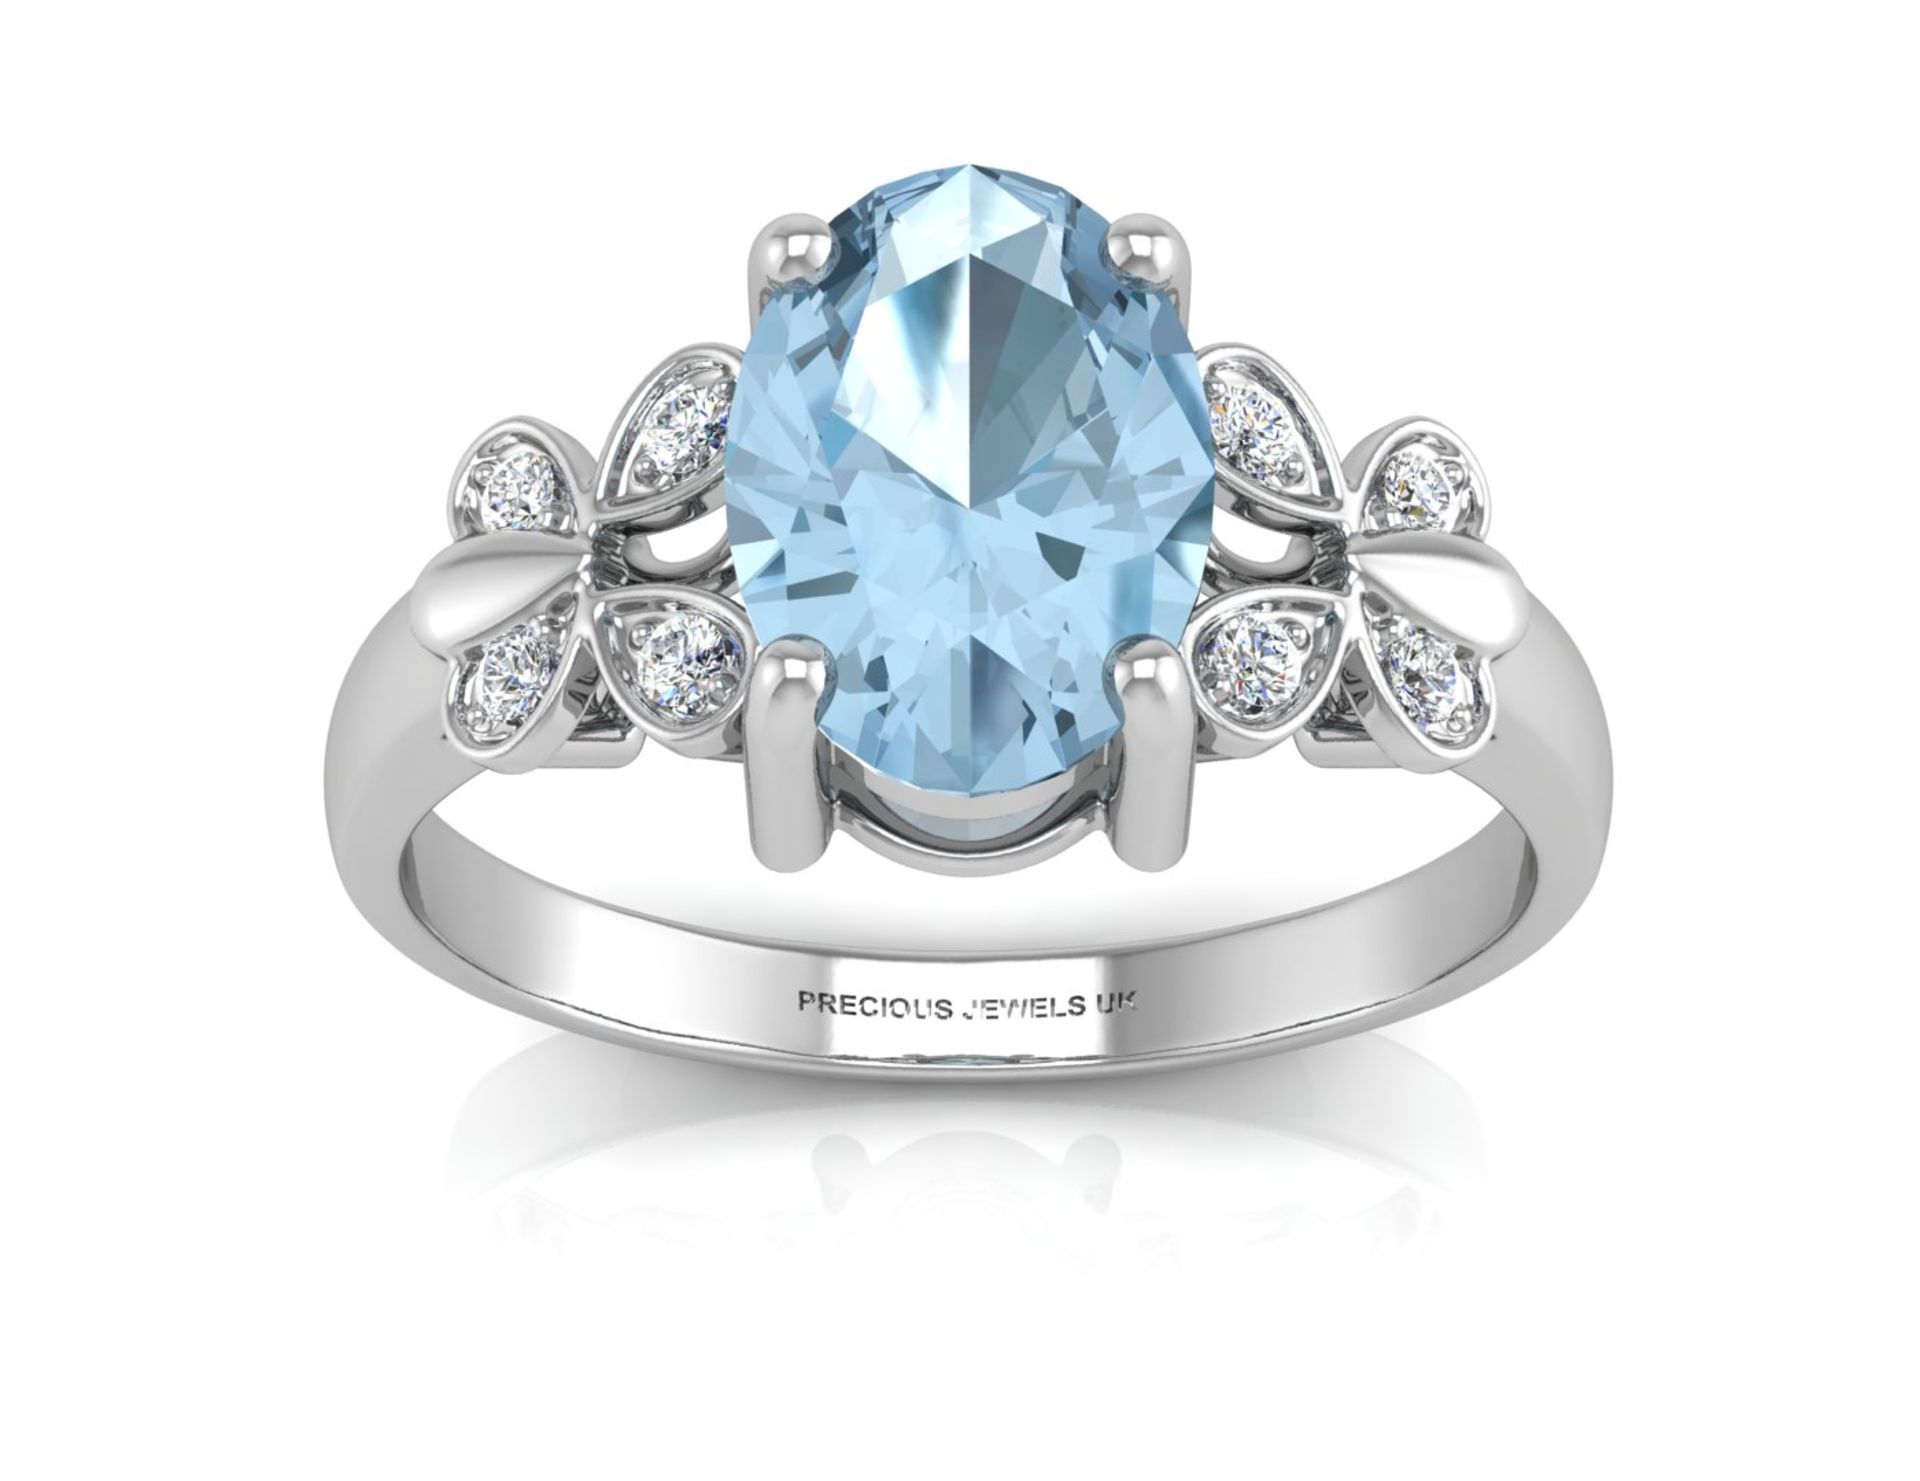 9ct White Gold Diamond And Blue Topaz Ring 0.03 - Image 3 of 5